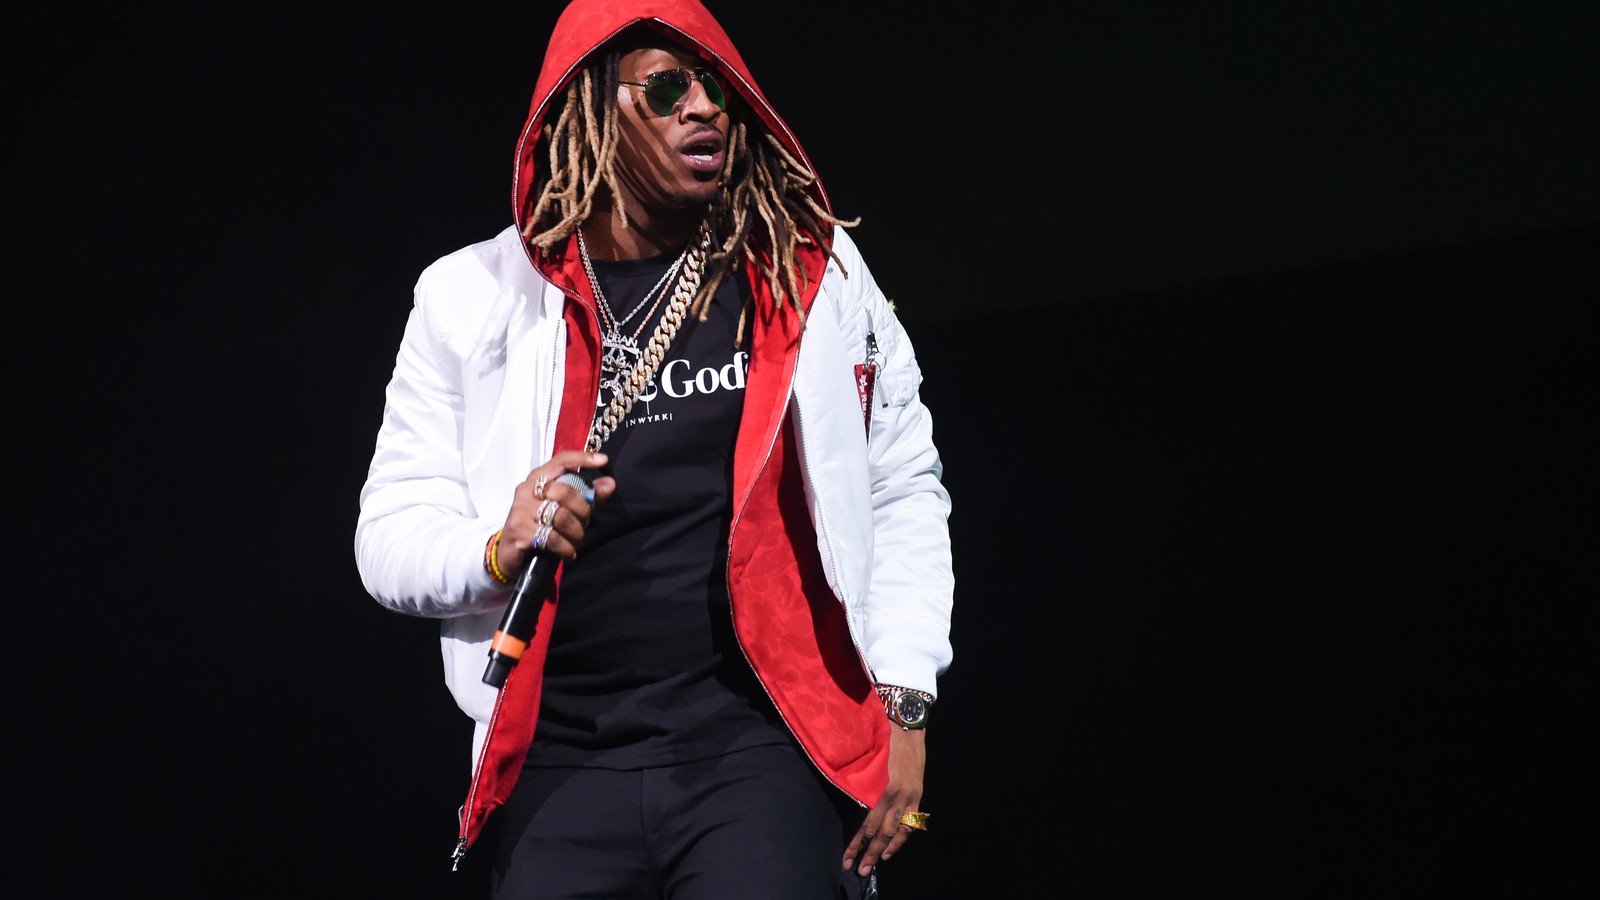 The Rapper Future Contains Multitudes on 'Future' and 'Hndrxx'